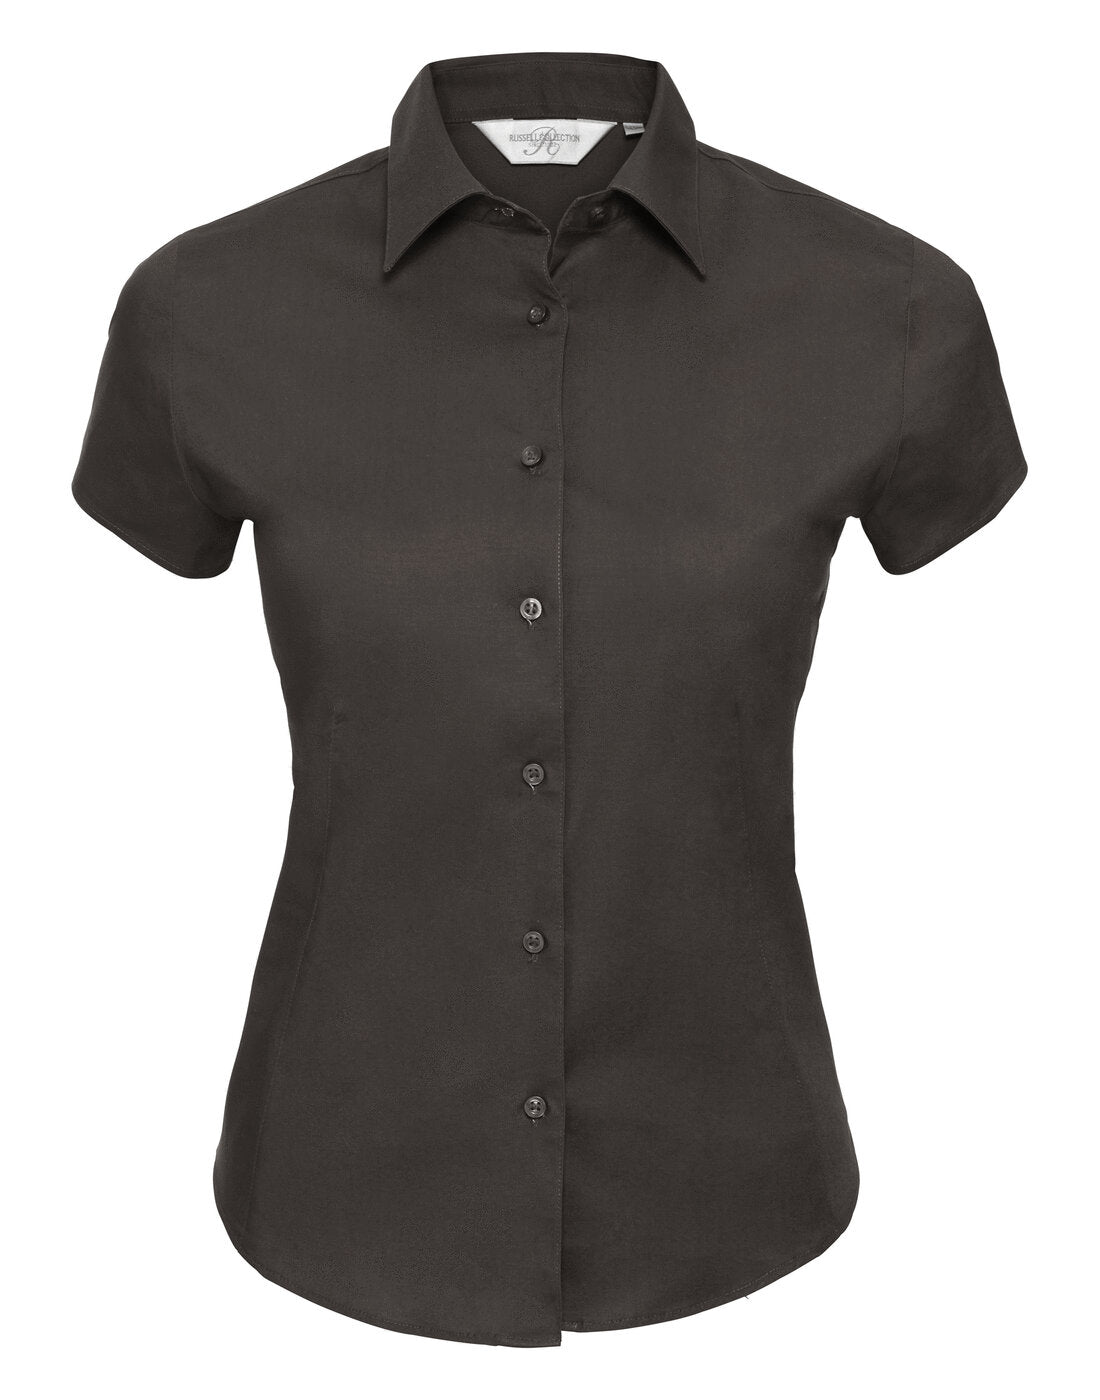 Russell Ladies Short Sleeve Fitted Shirt Chocolate